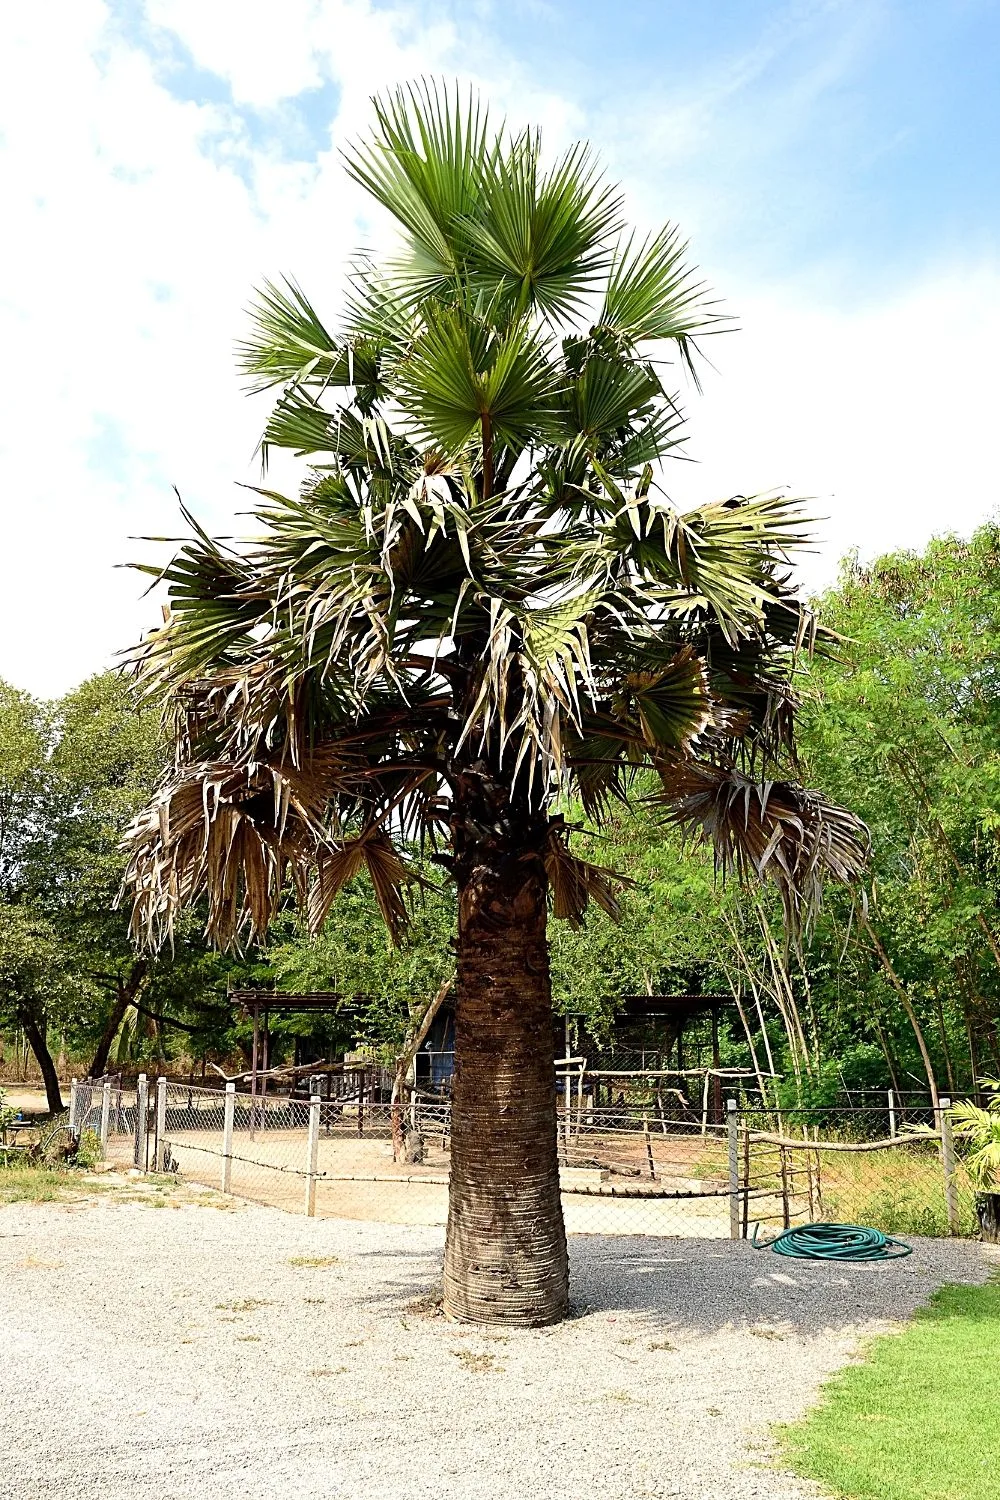 Windmill Palm is a great centerpiece plant for your southeast facing garden